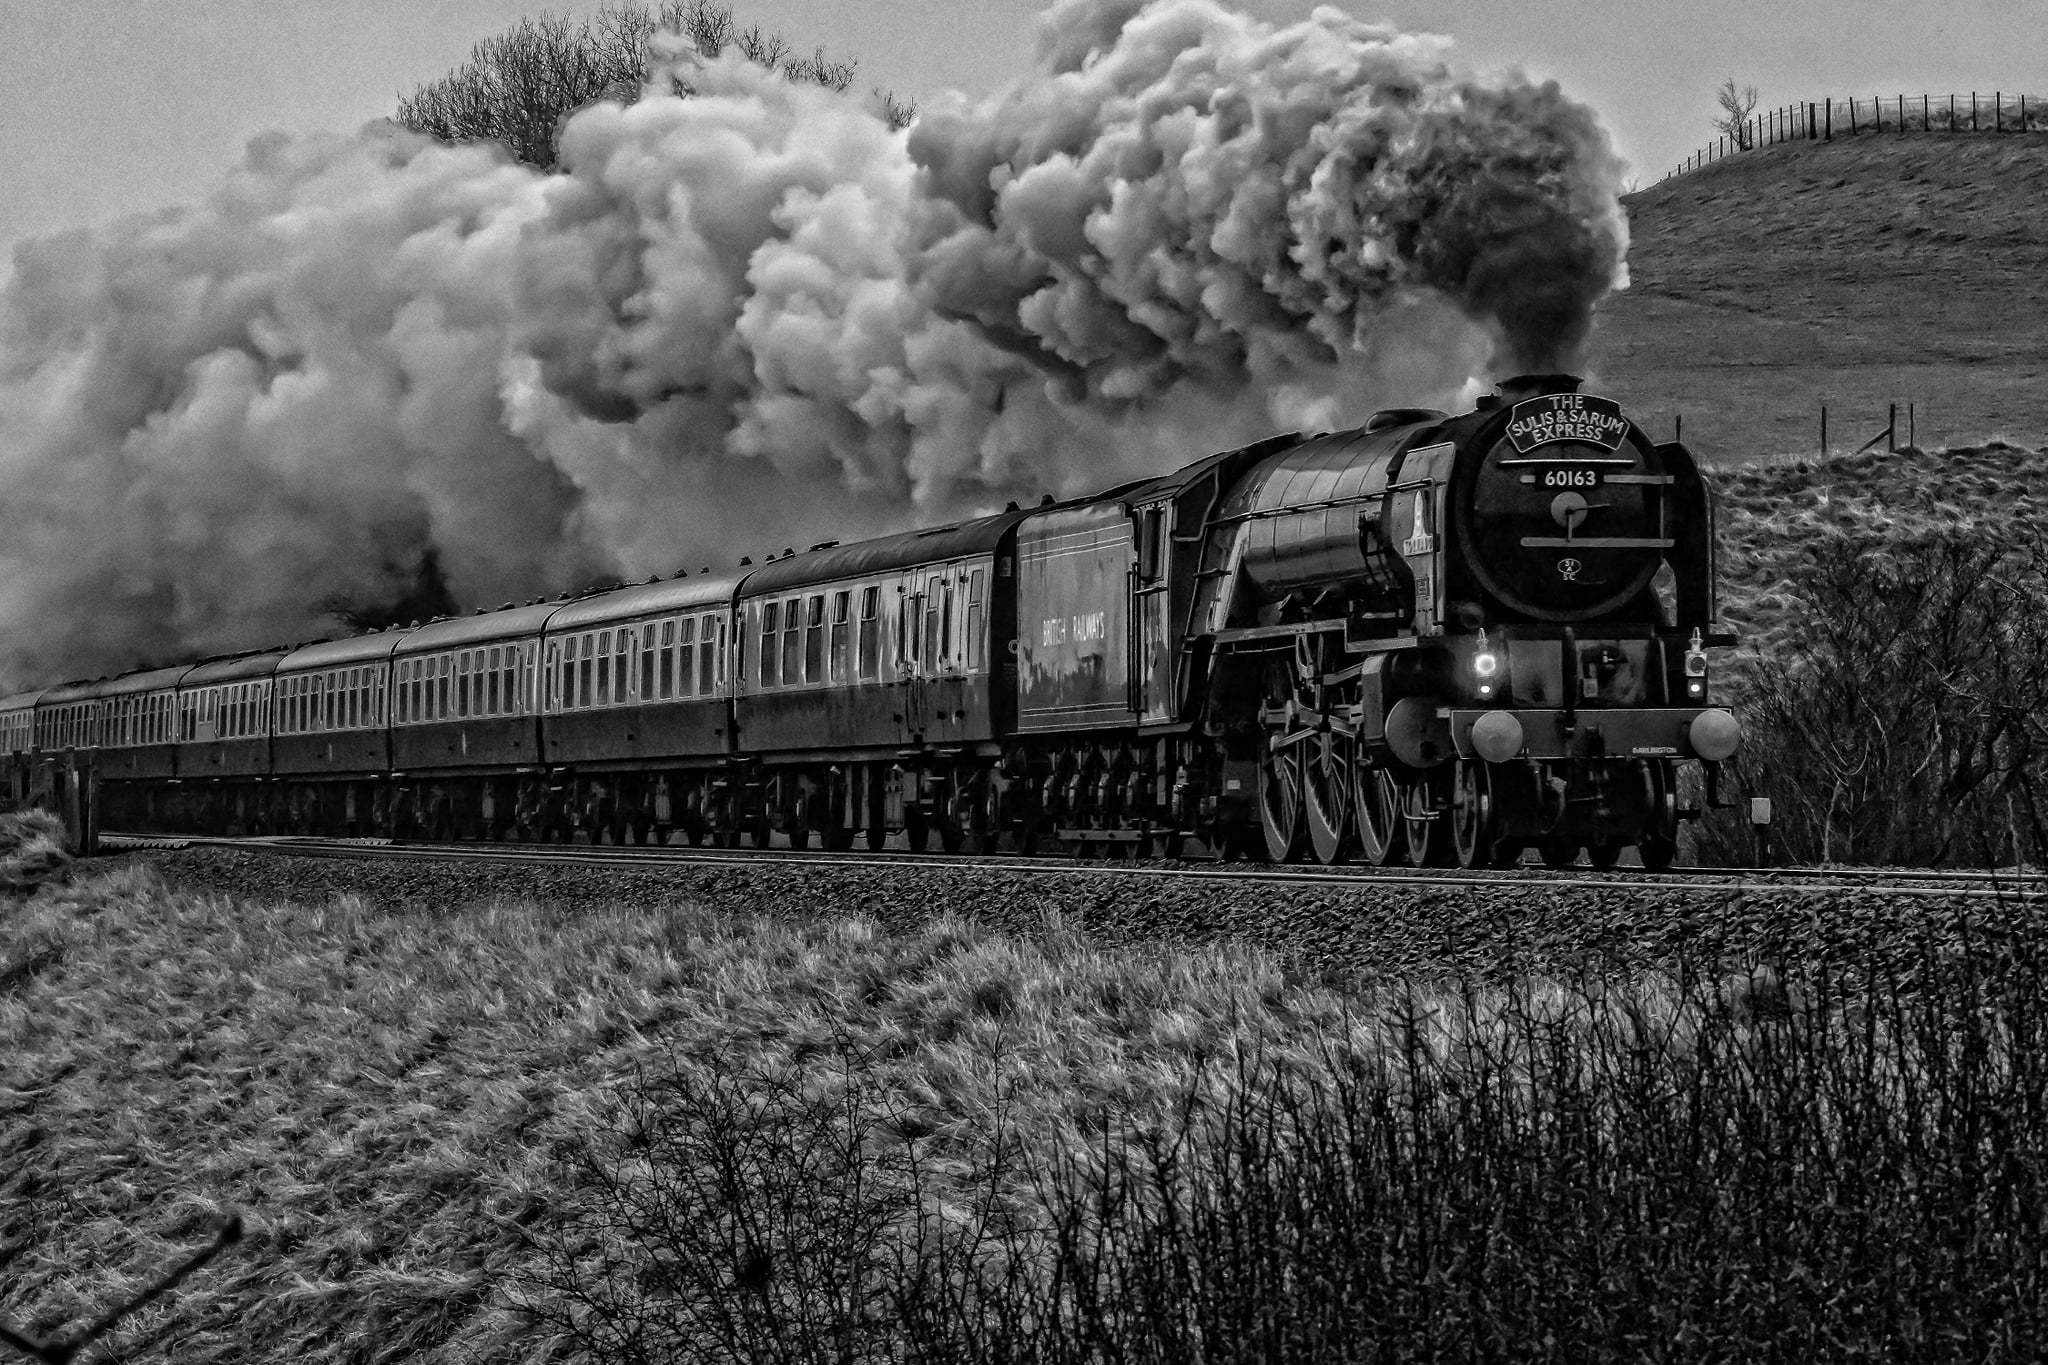 First place: Steam Loco ‘Tornado’ in the Wylye Valley at Steeple Langford By Terry Waldron